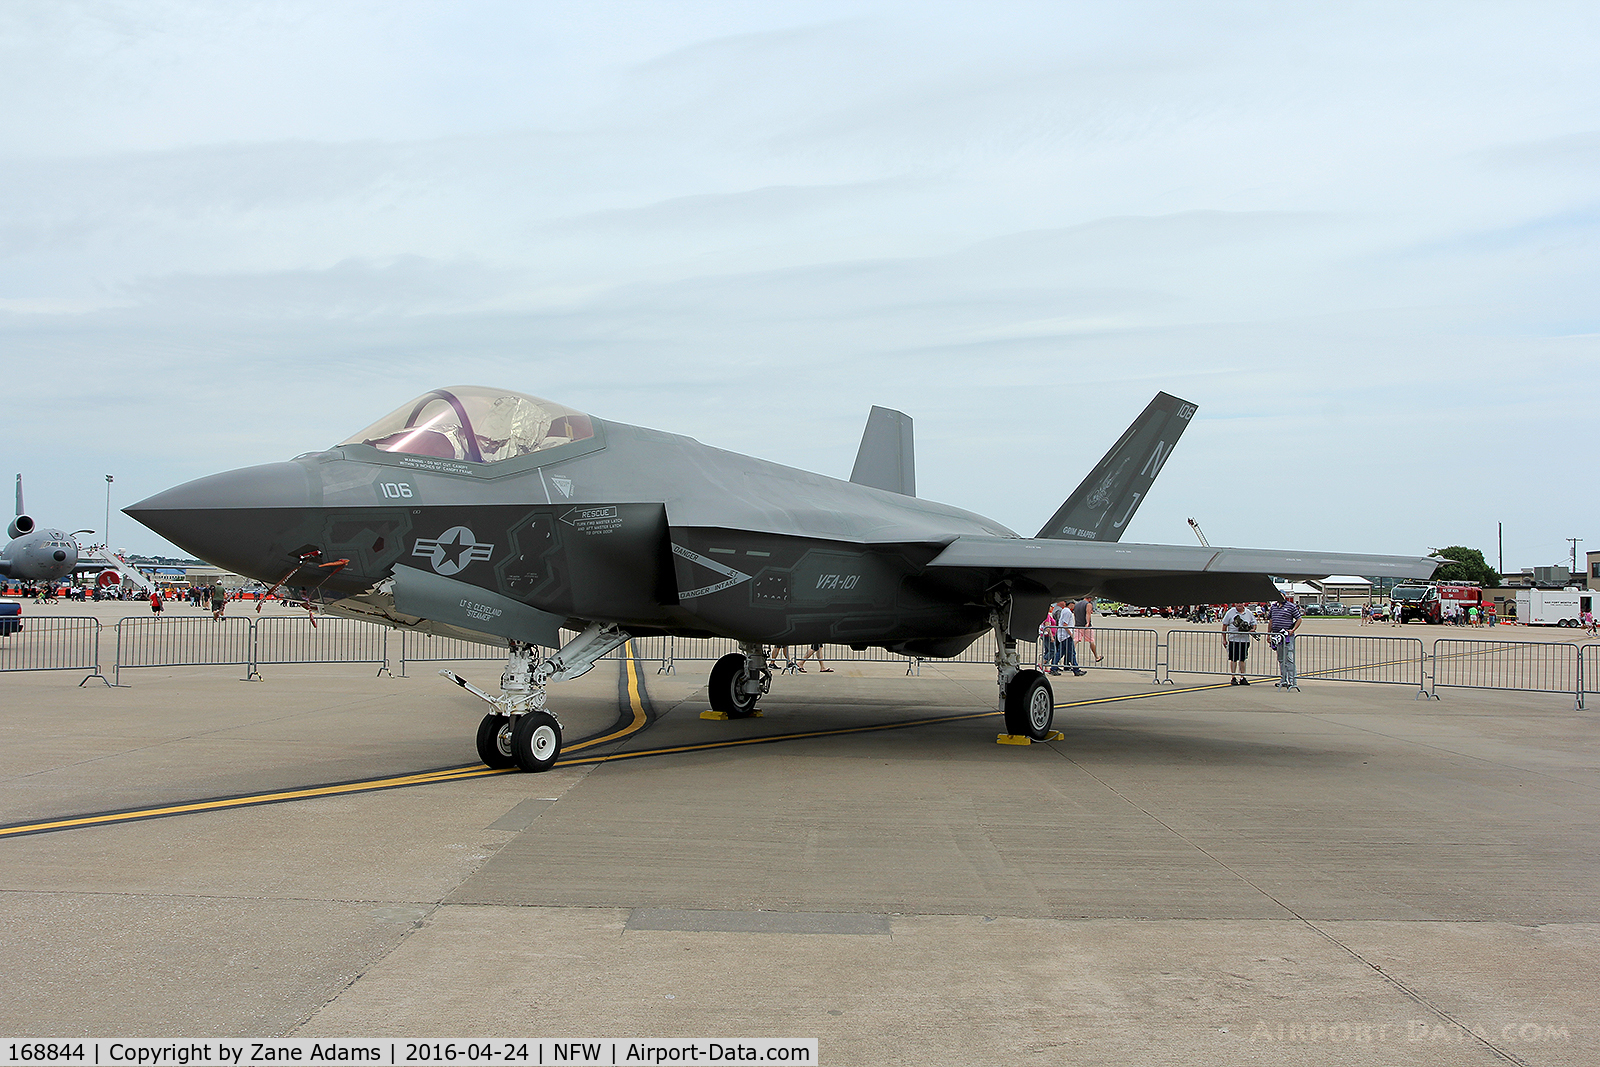 168844, 2014 Lockheed Martin F-35C Lightning II C/N CF-13, At the 2016 Airpower Expo - NAS Fort Worth